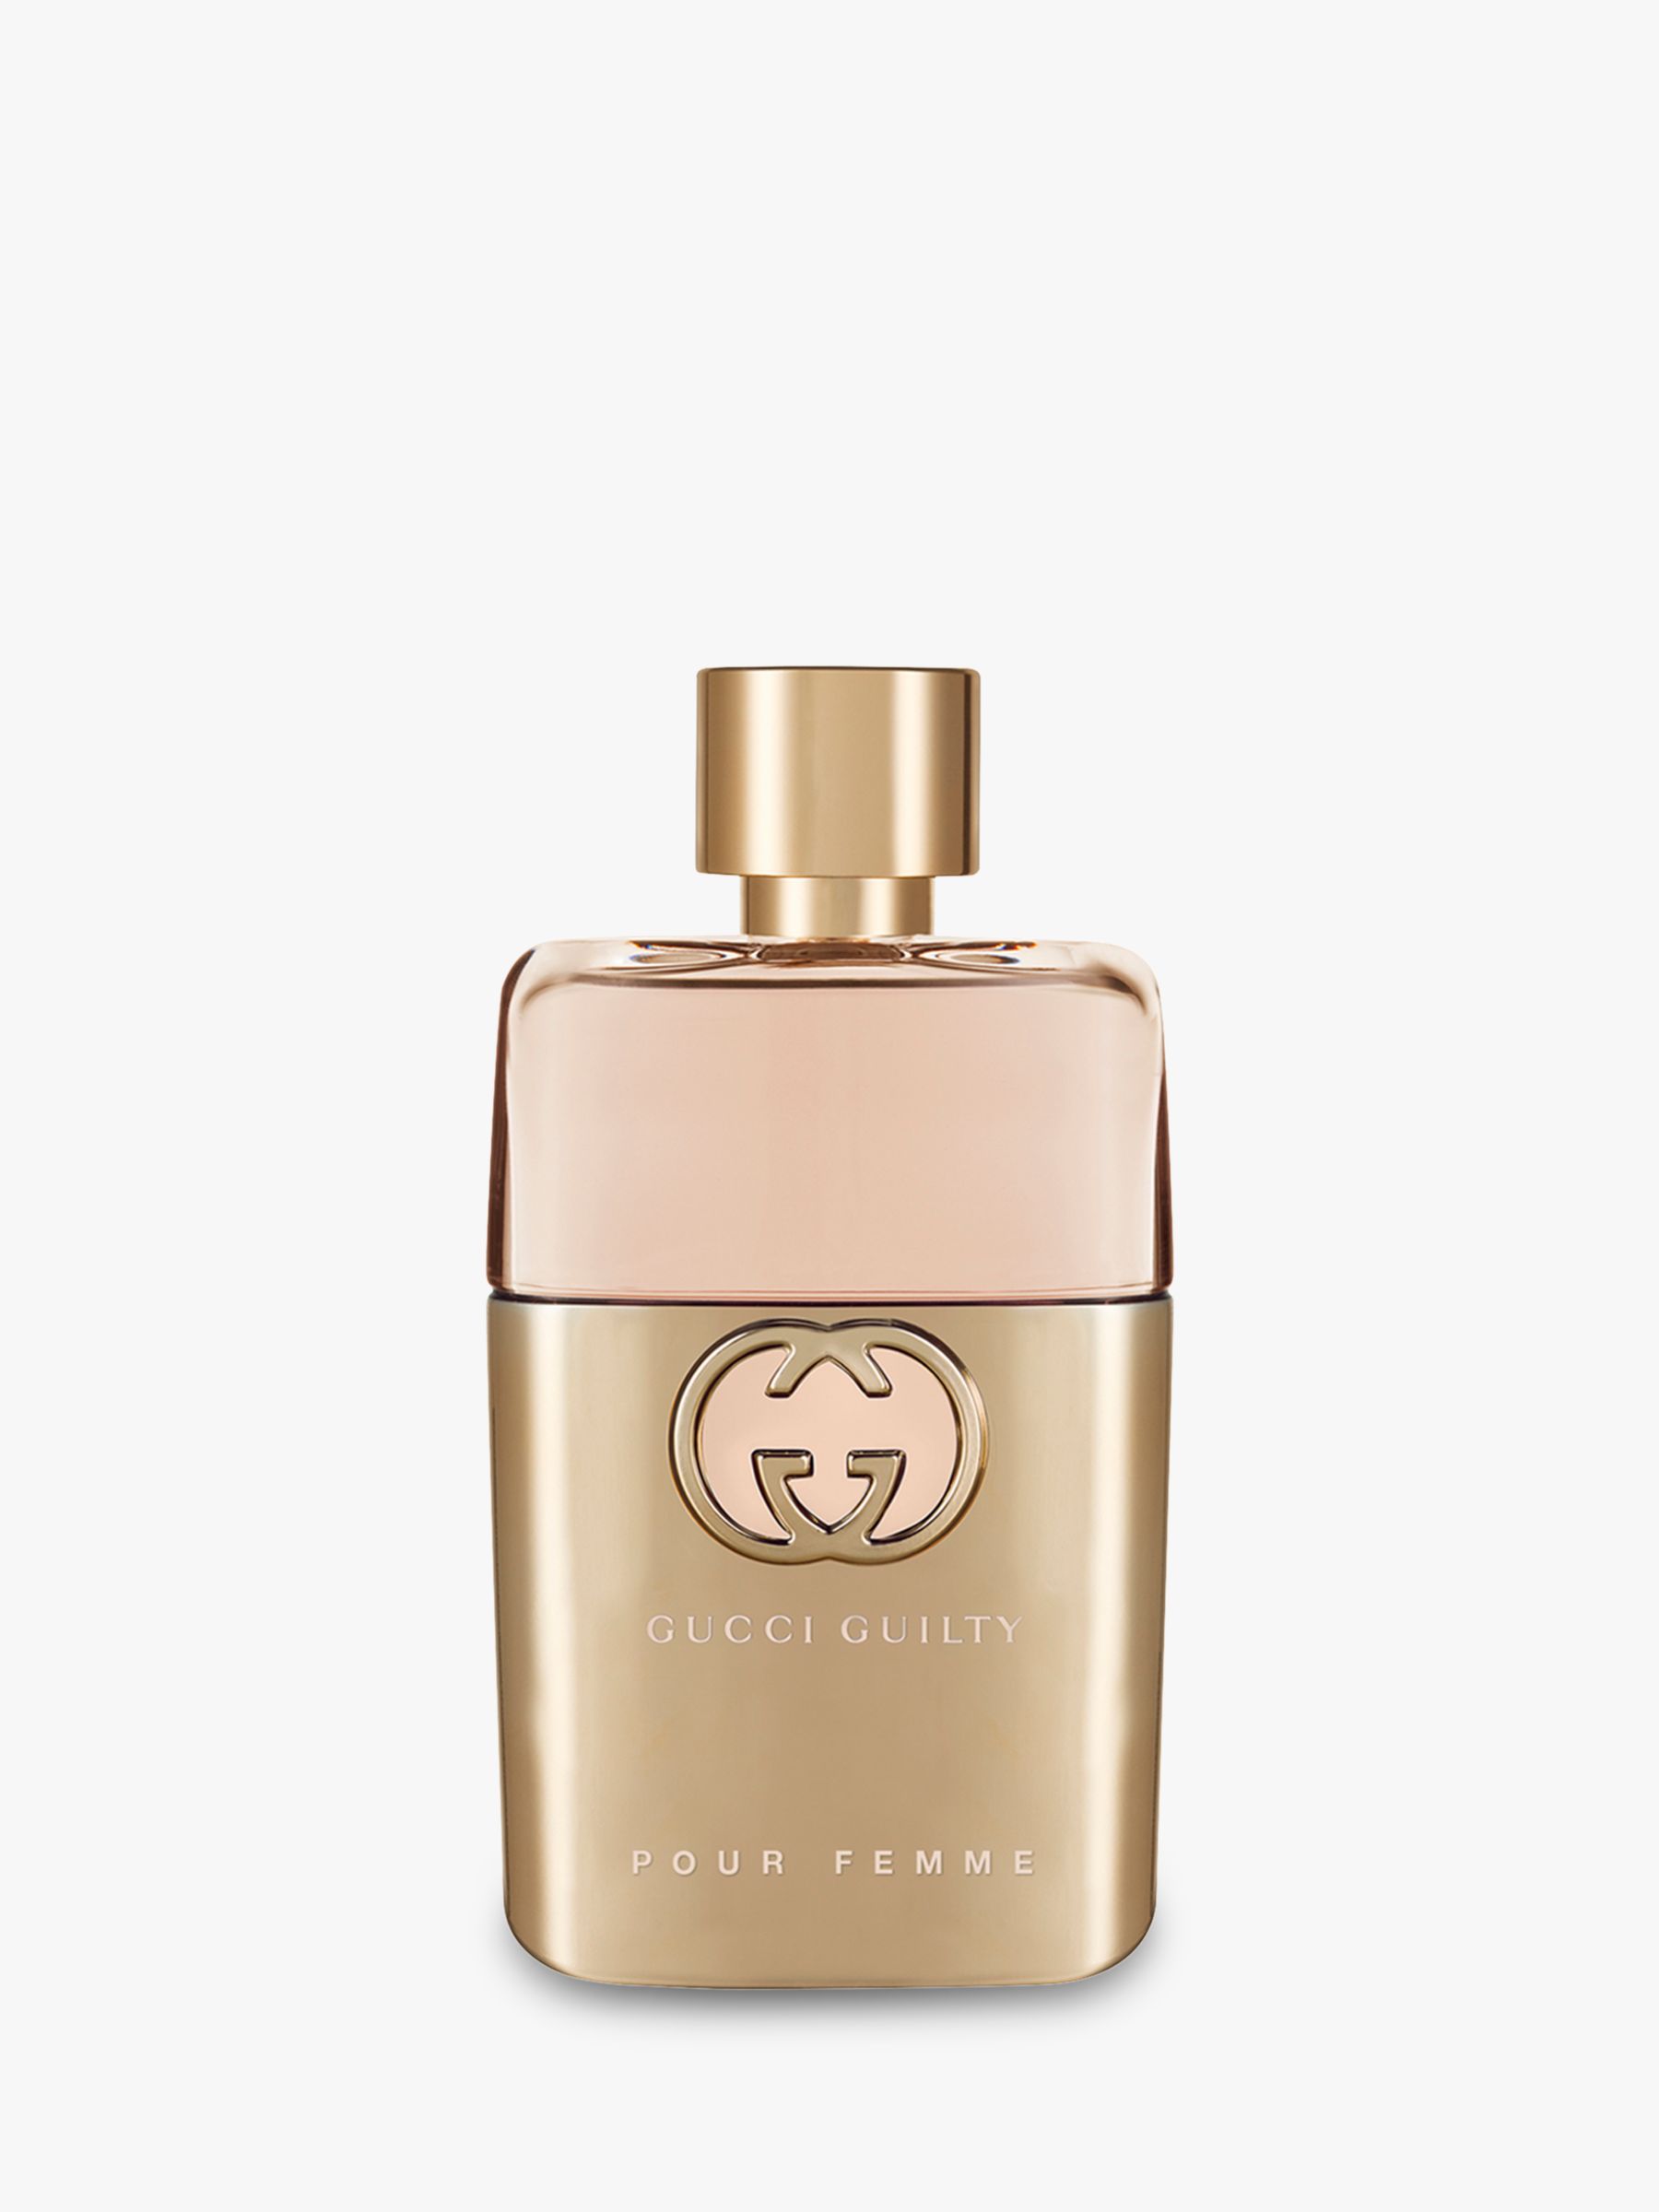 øst honning Scully Gucci Guilty Eau de Parfum For Her, 50ml at John Lewis & Partners